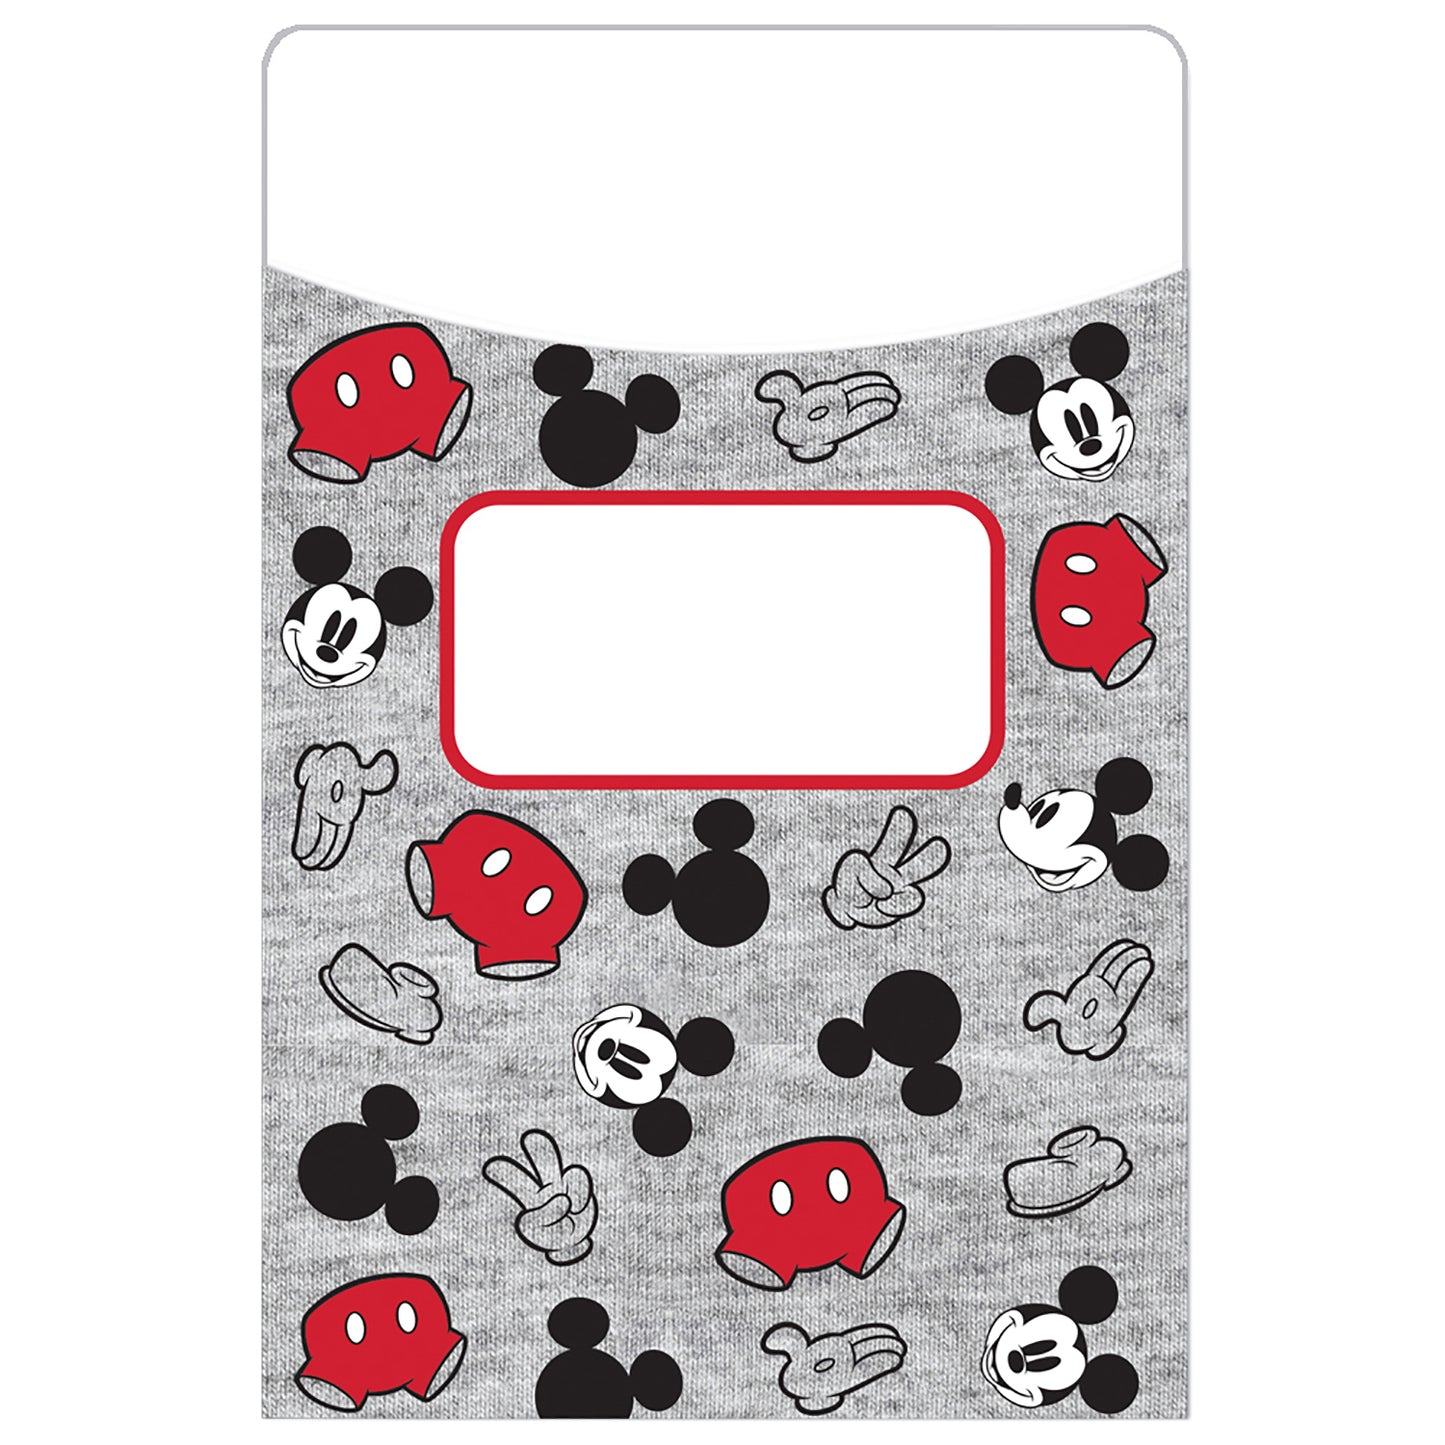 Mickey Mouse® Throwback Library Pockets, 35 Per Pack, 3 Packs